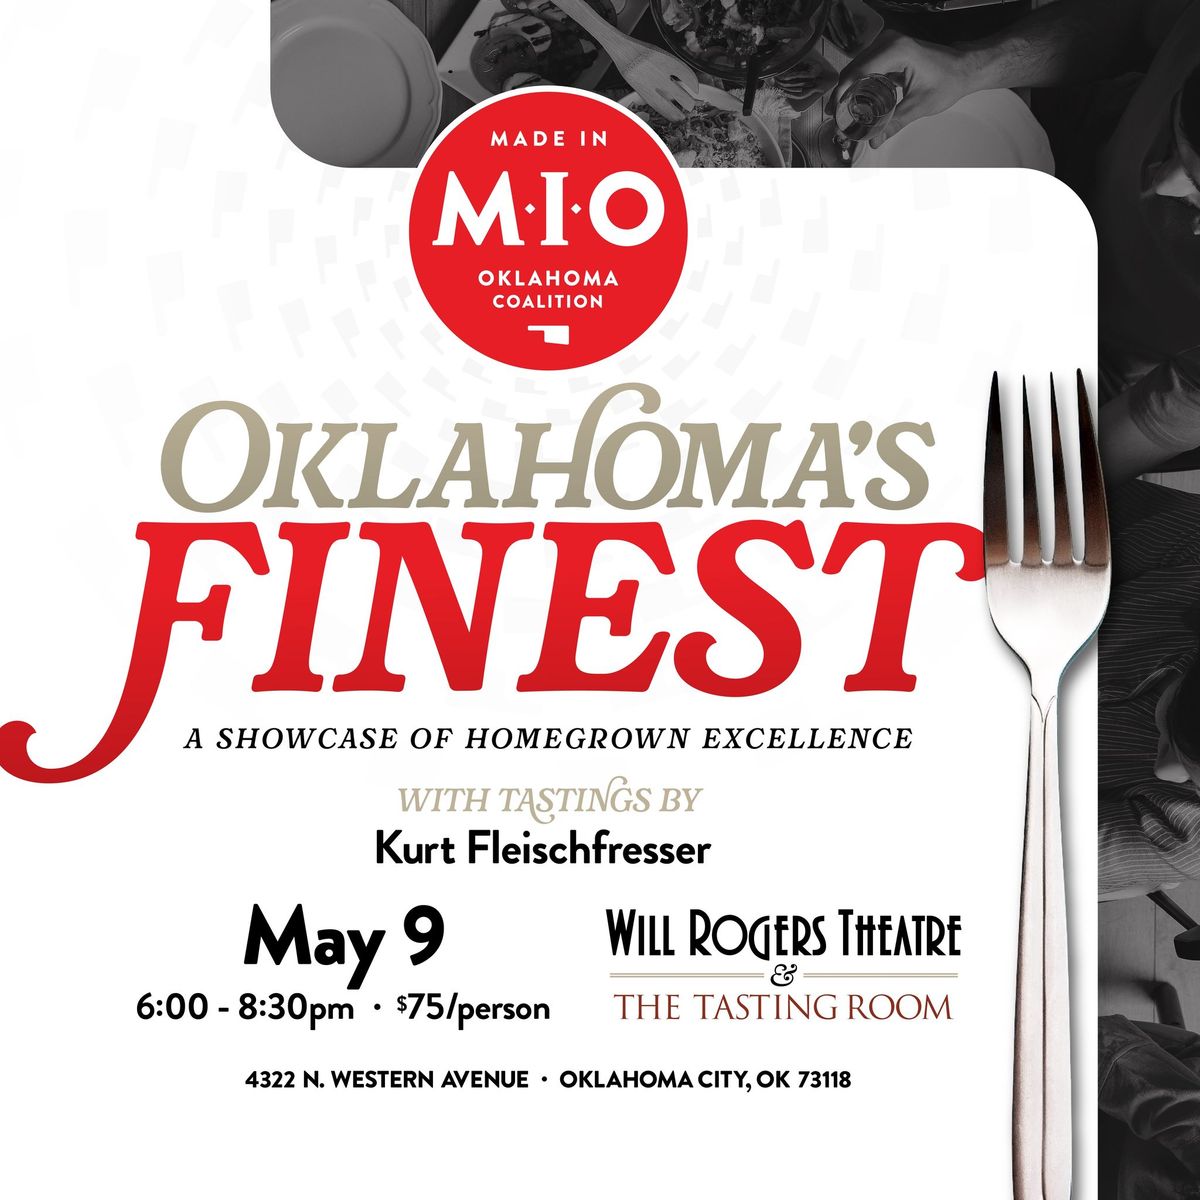 The Made in Oklahoma Coalition Presents - Oklahoma's Finest: A Showcase of Homegrown Excellence